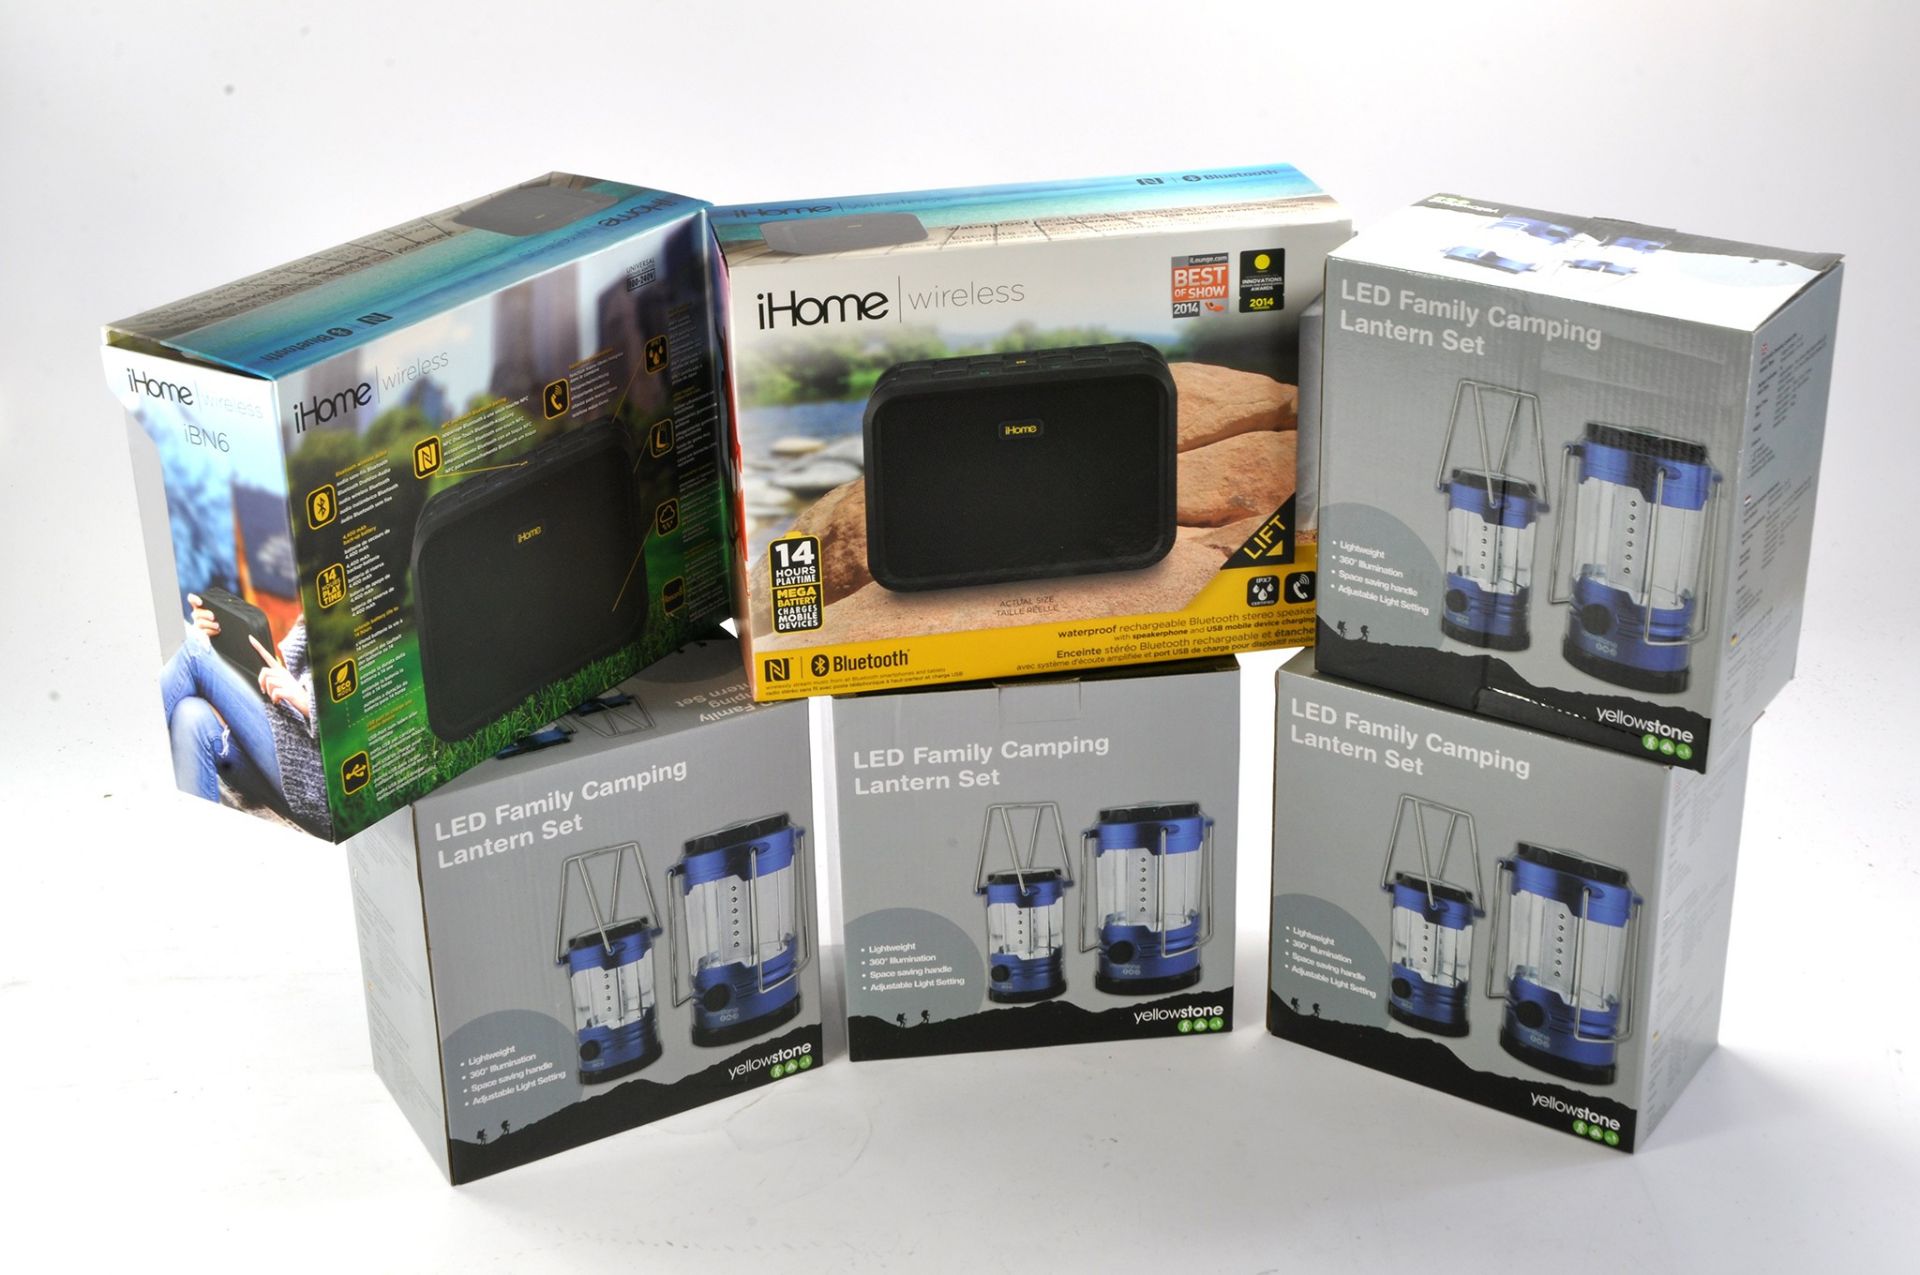 Ihome Wireless Speaker System x 2, plus Camping Lanterns x 4. All look to be unused.